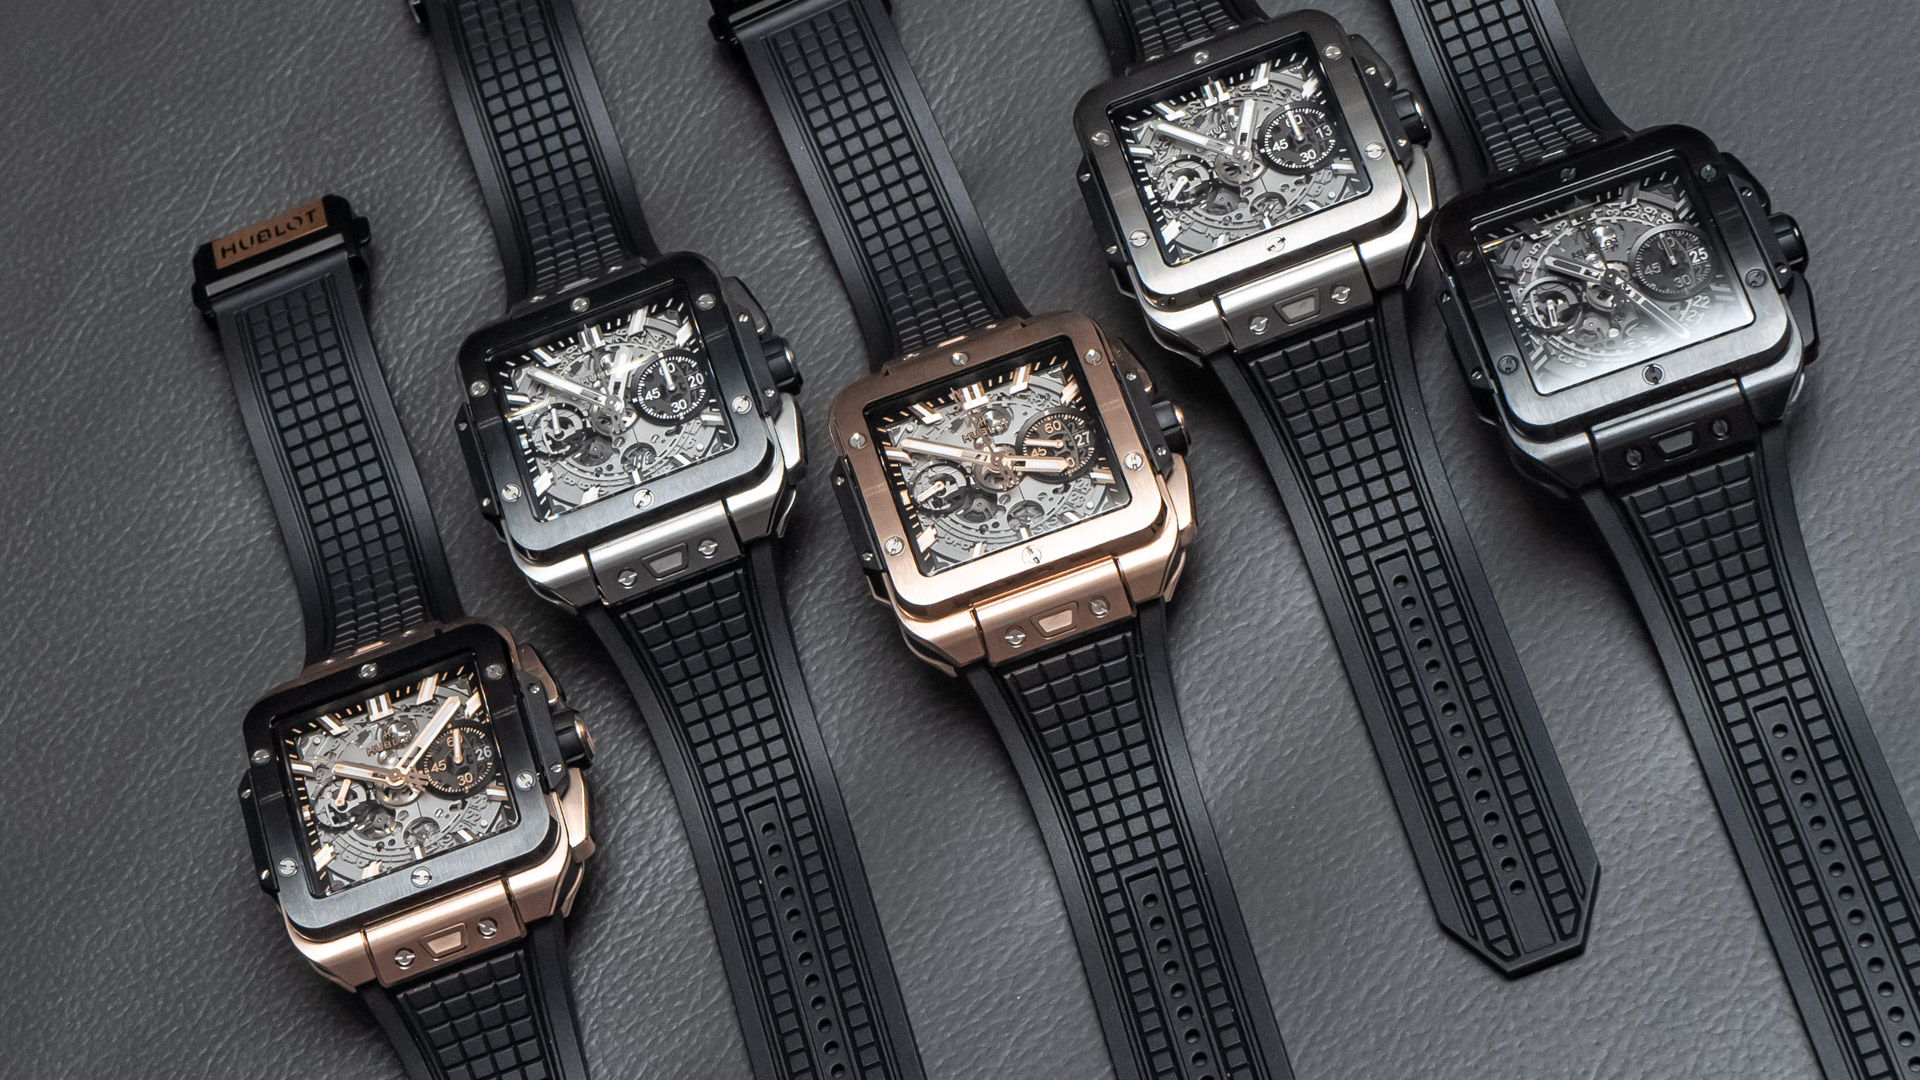 SQUARE BANG UNICO: A NEW WATCH-SHAPE TAKES FORM AT WATCHES & WONDERS